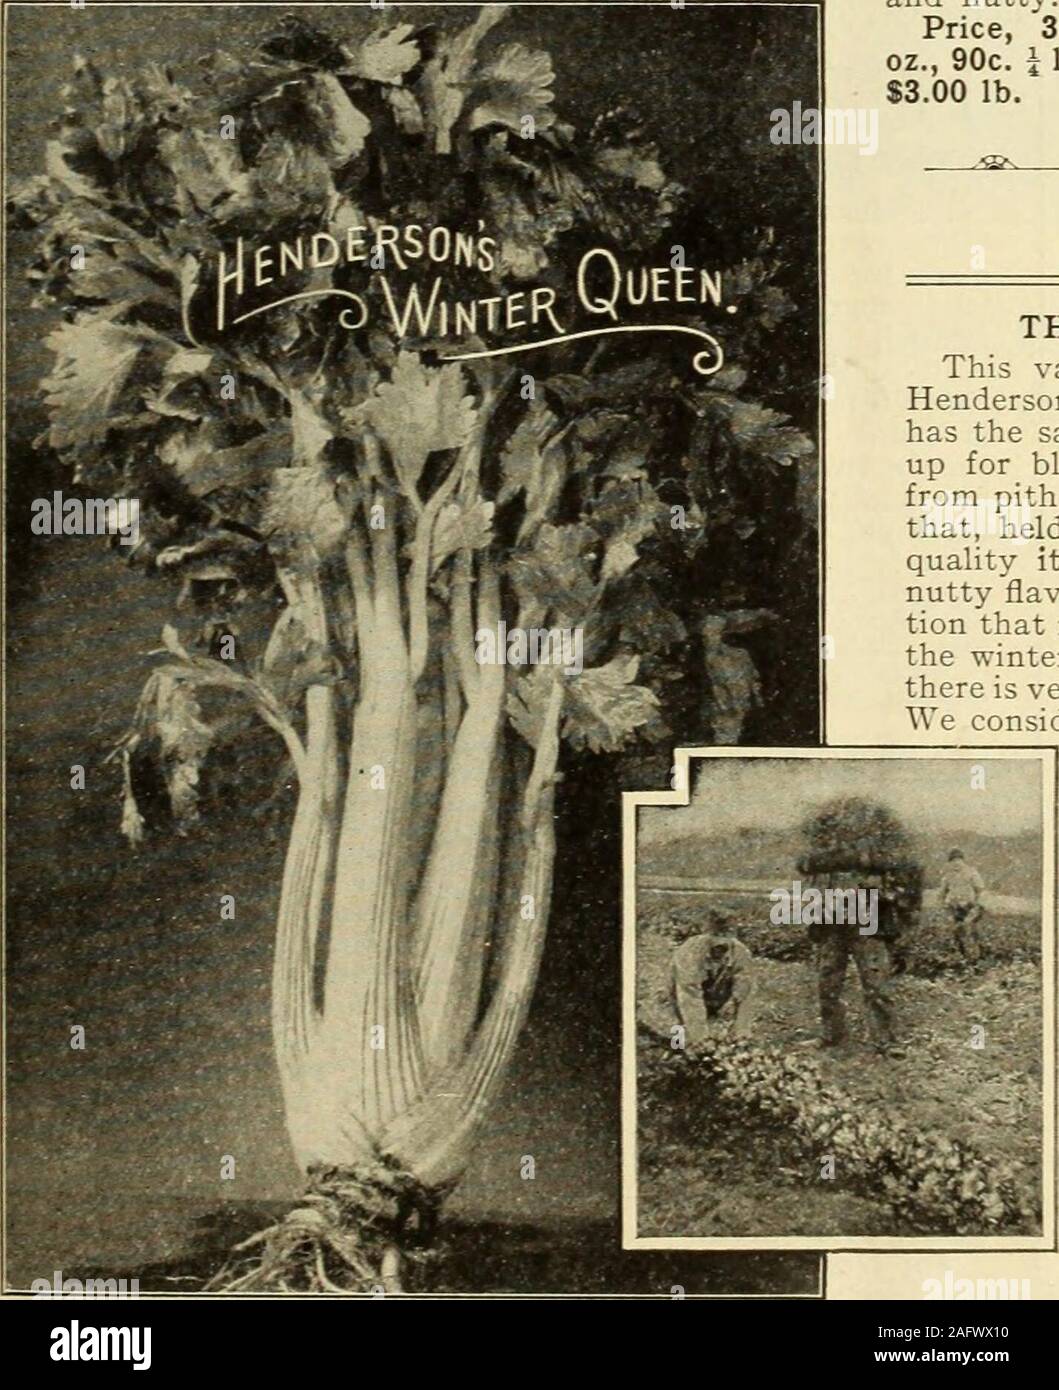 . Henderson's wholesale catalogue. : seeds, implements, fertilizers, insecticides &c. for market gardeners and truckers. L. Rhodes, had 20 acres of Golden Self Blanching Celery from your seed .L. H. Rhodes had 7 acres and part of mine was from your seed. Not a hollow Celery fromHendersons Seed—the other is nearly all hollow. W. S. RHODES, Kent, Ohio. WHITE ROCK CELERY. A new and unsurpassed variety for winter use, of very dwarf andvigorous habit with large solid heart, crisp, and tender; blanchesquickly after banking to a rich creamy-white color, a most desirablevariety for market use. It is a Stock Photo